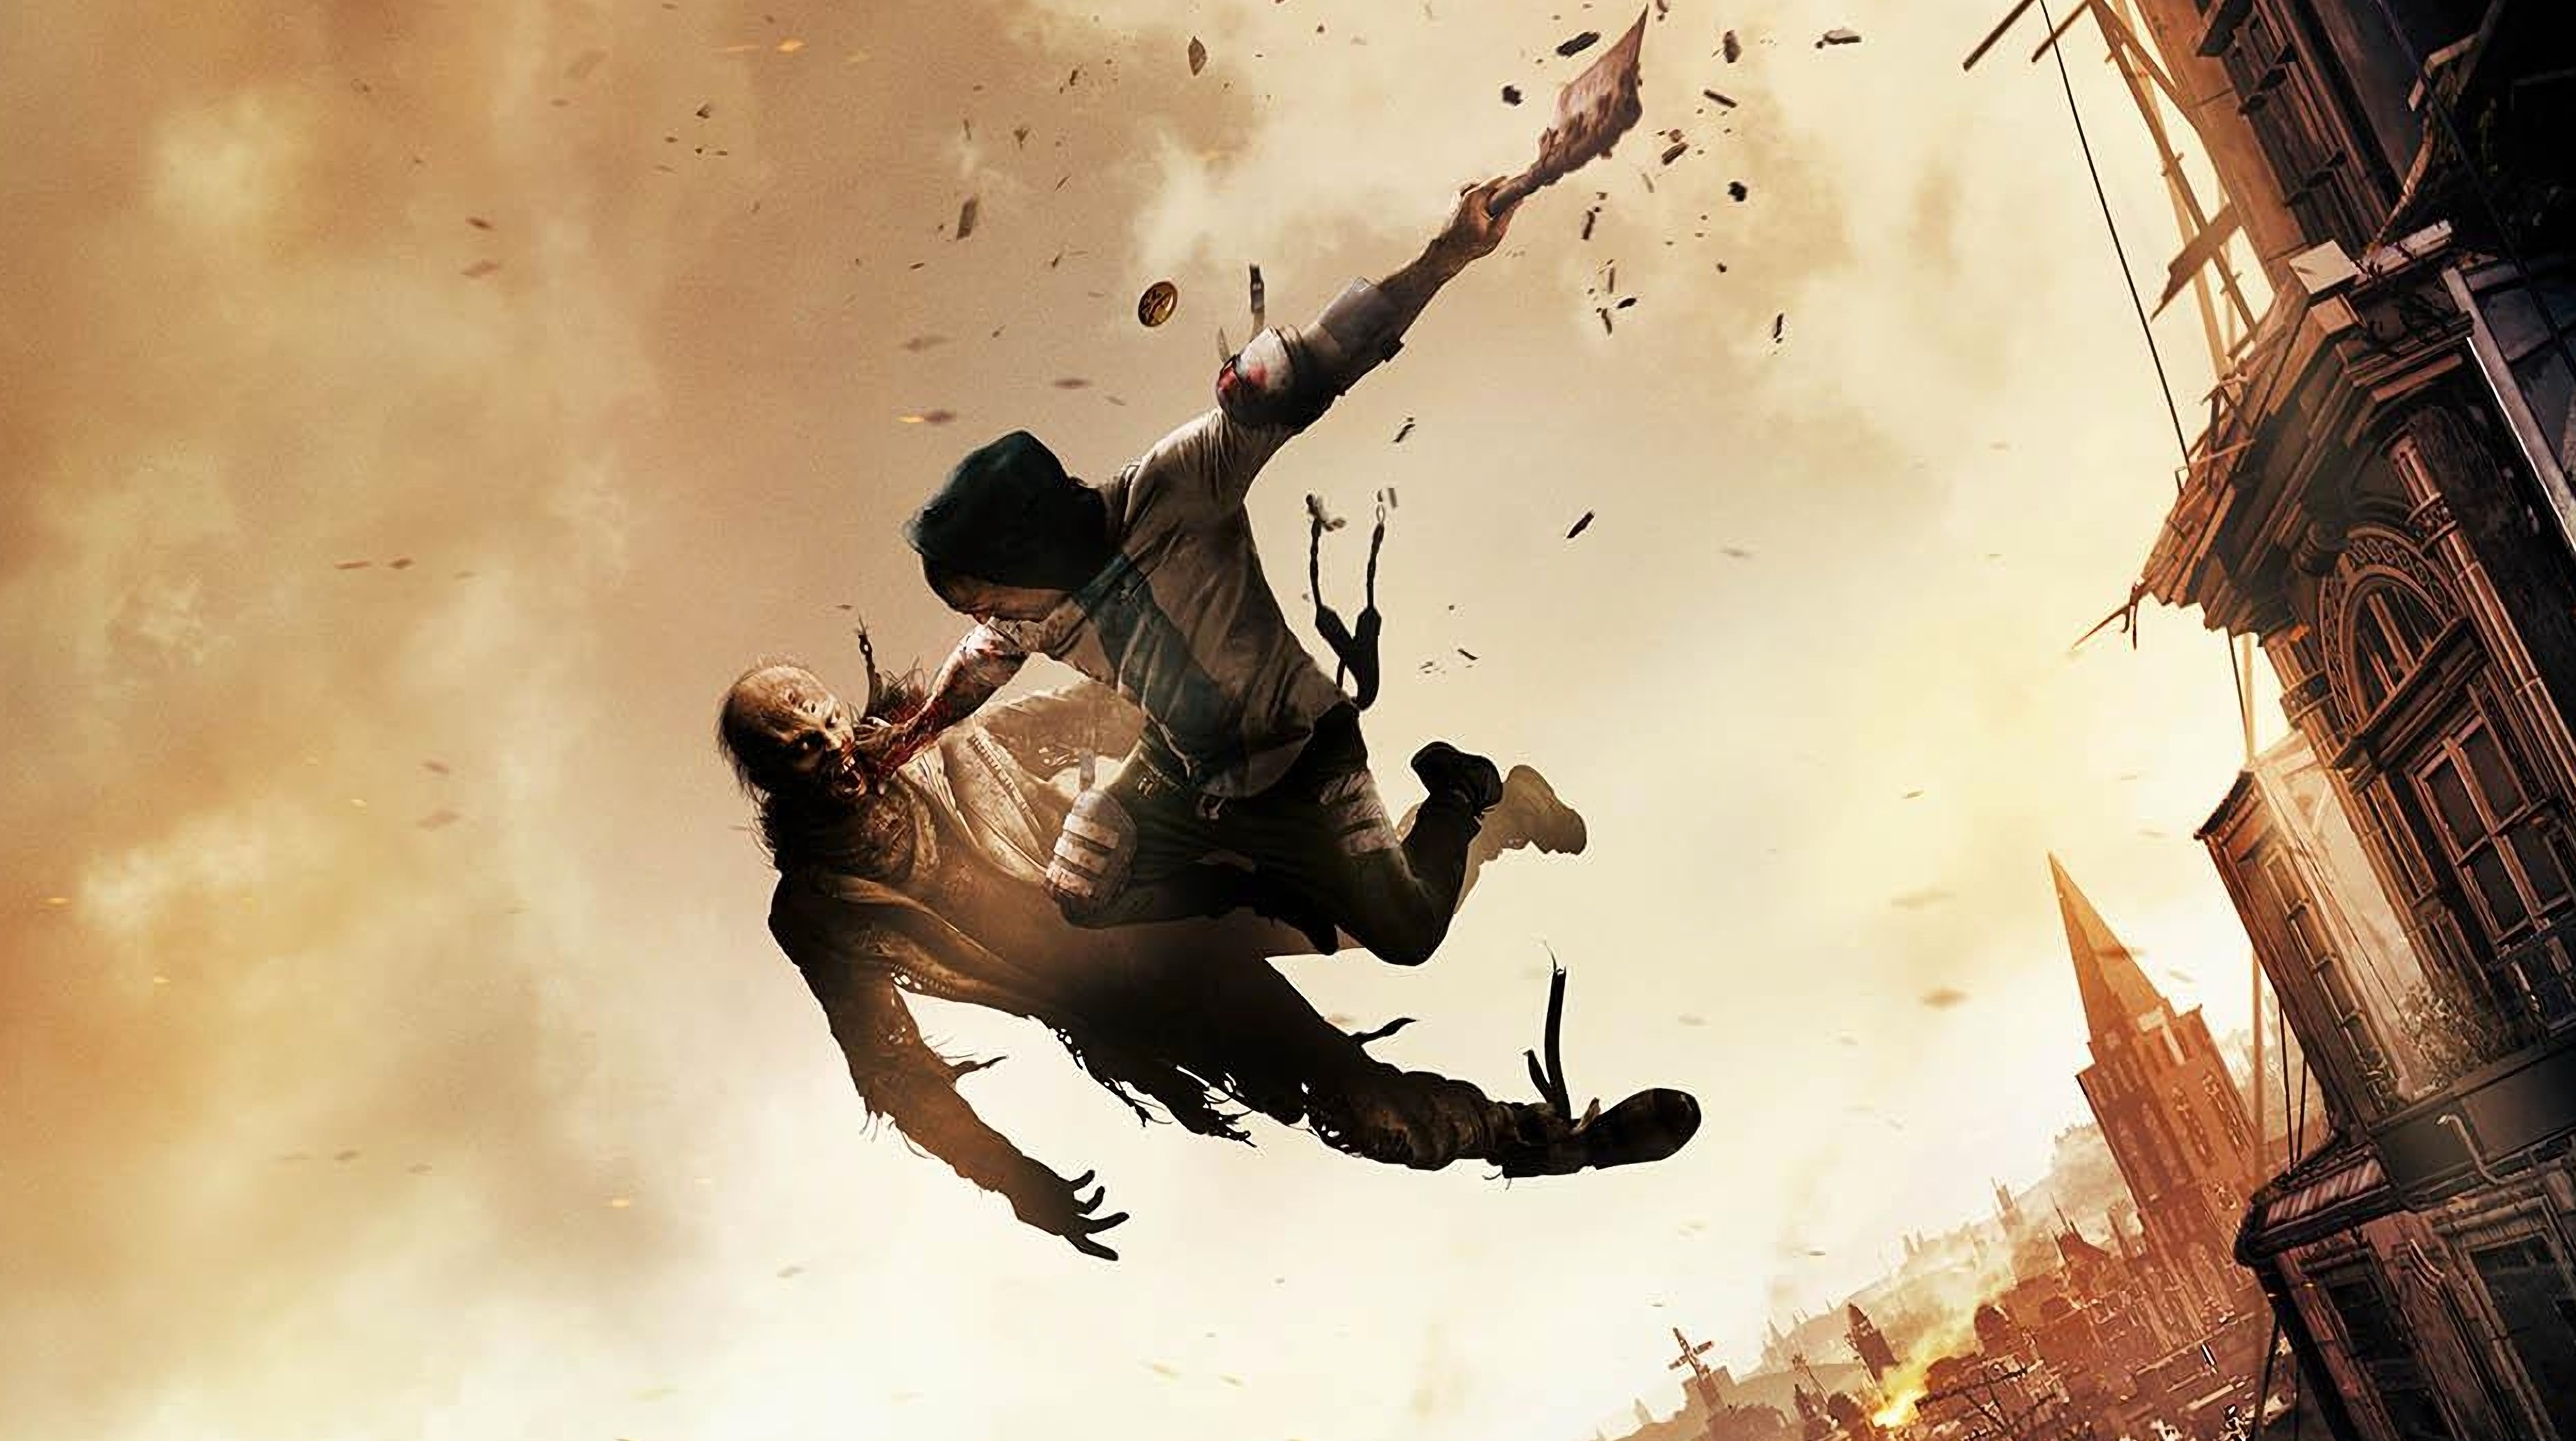 Image for Dying Light 2 PC is a graphics juggernaut that powers past the consoles